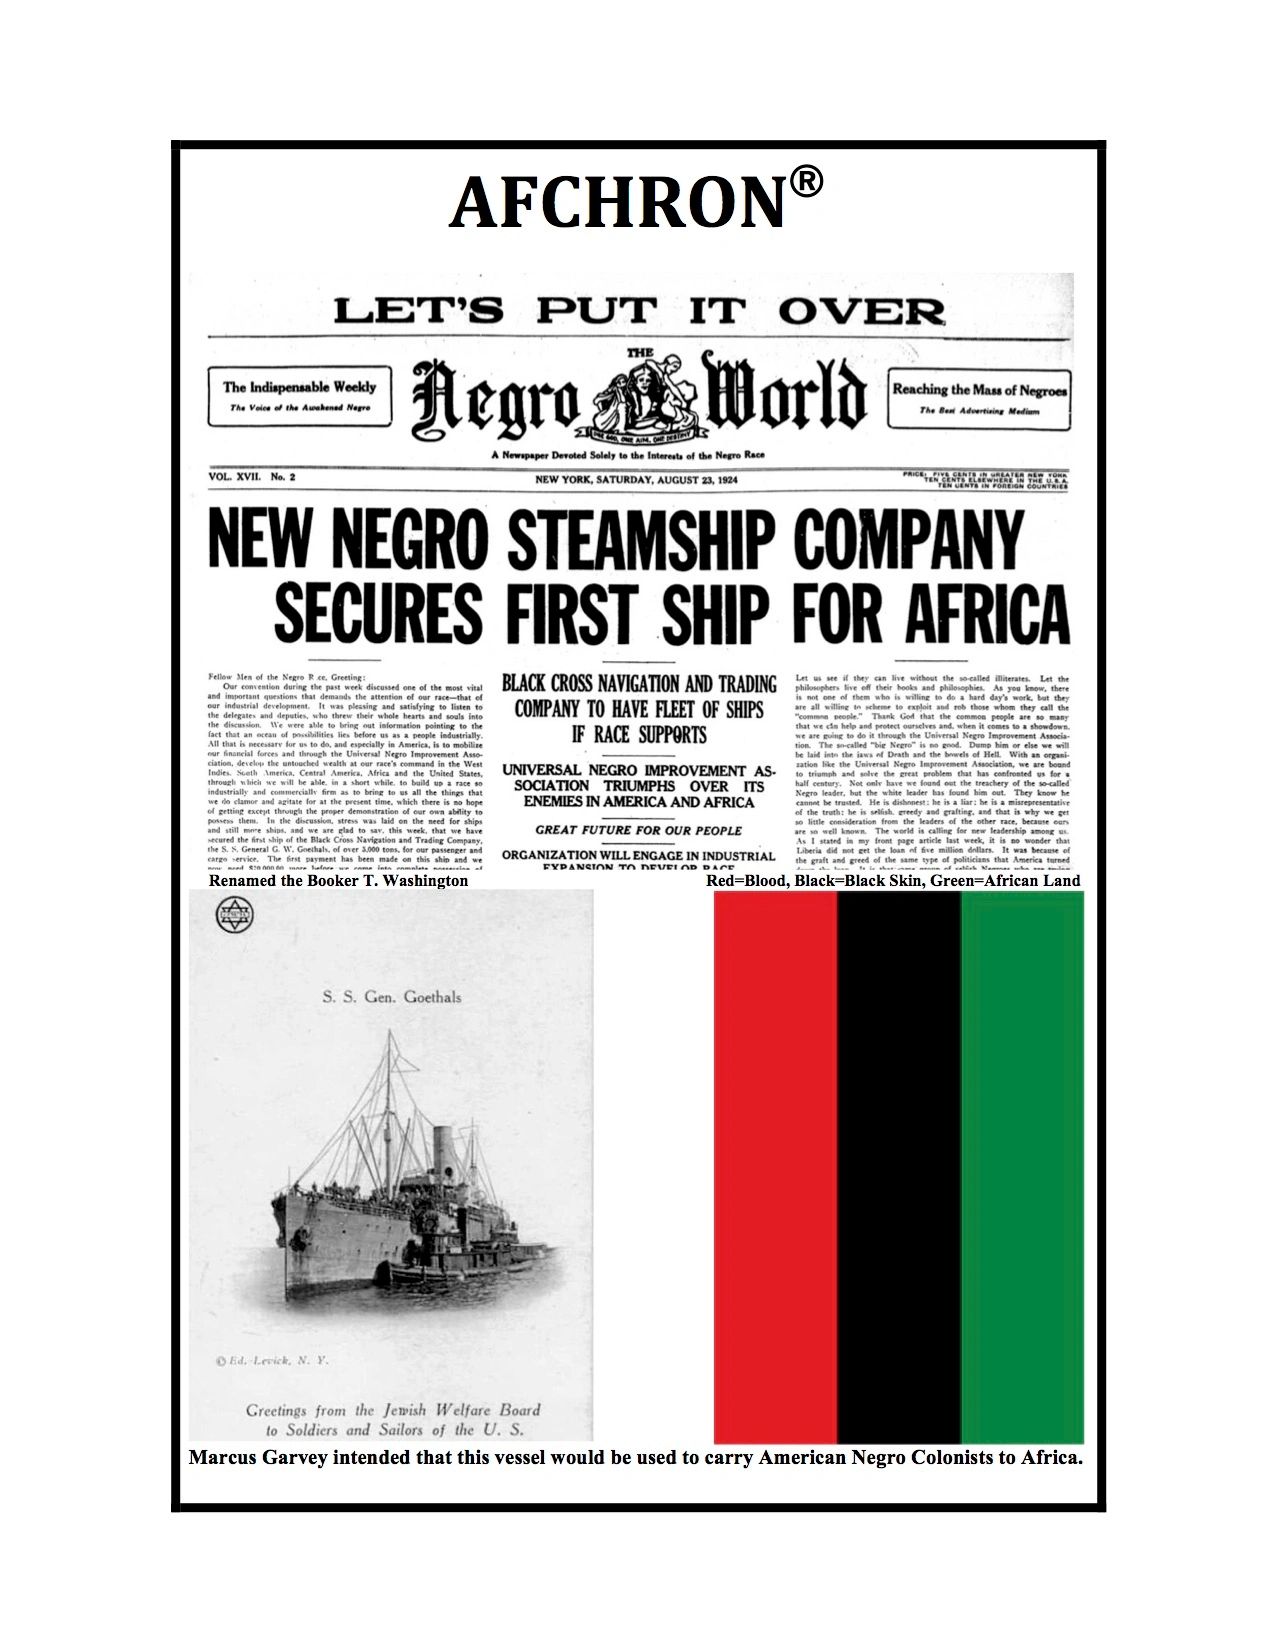  Black Cross Navigation  and Trading Company to have Fleet of Ships to take us back to Africa.